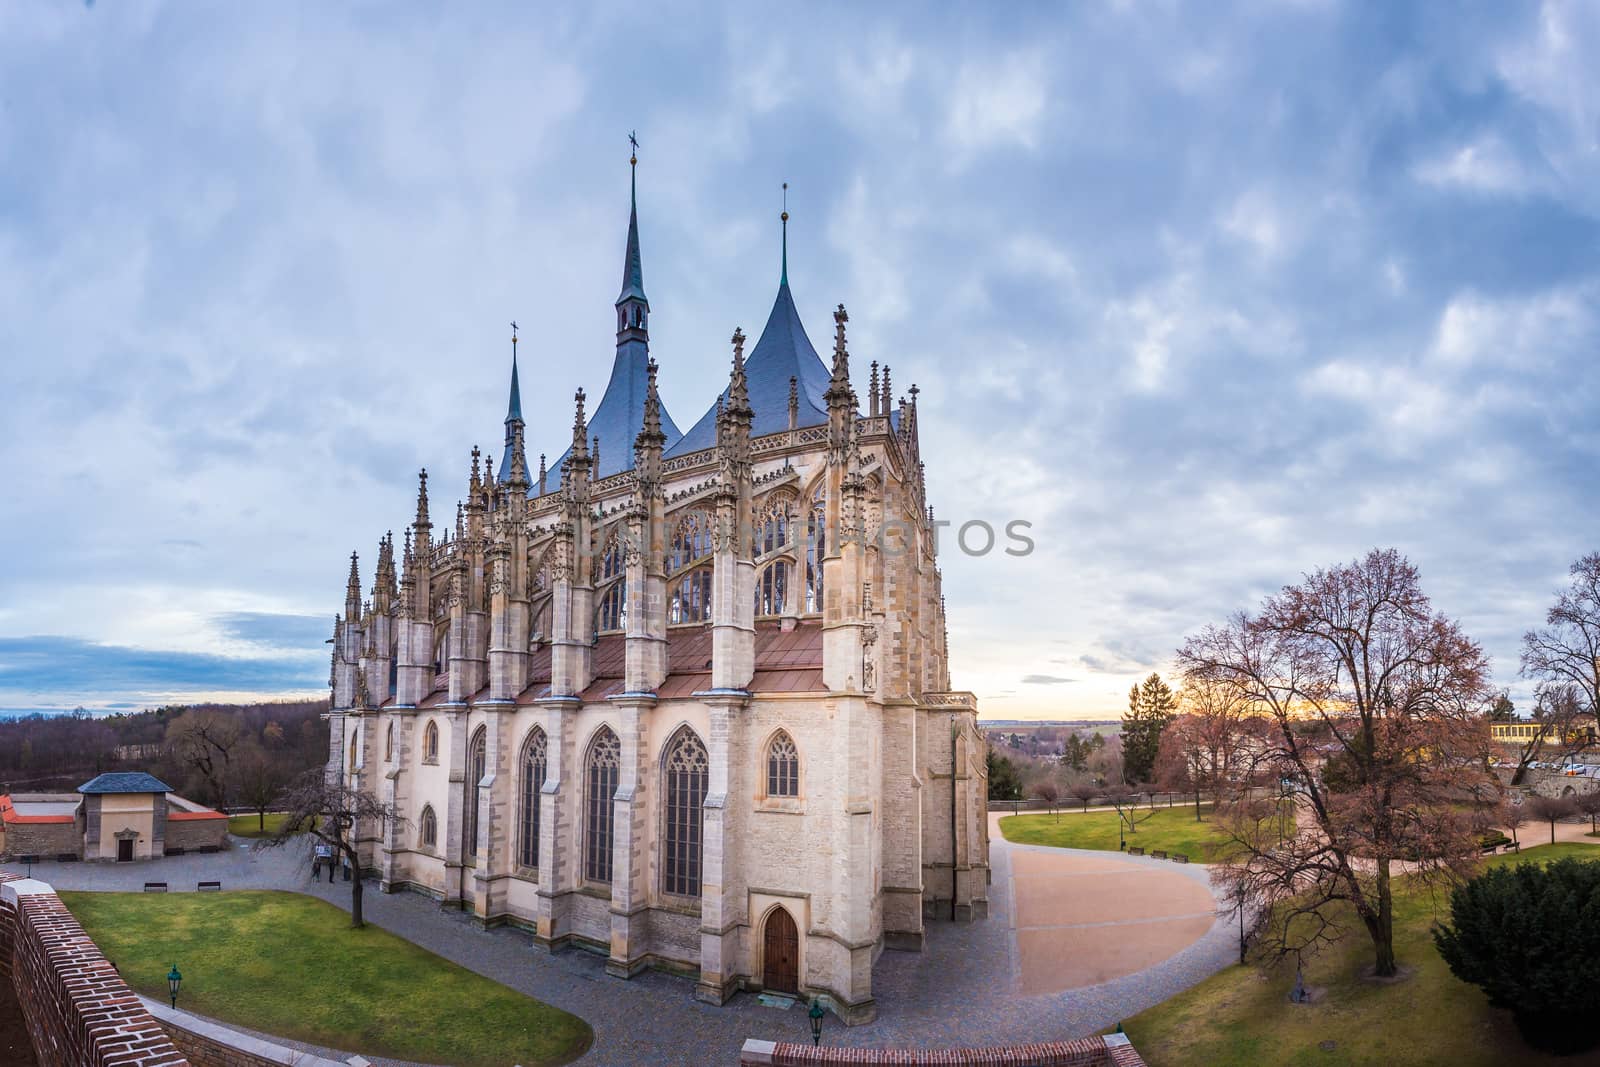 St. Barbara cathedral in Kutna Hora, jewel of Gothic architecture and art of Czech Republic. Kutna Hora is UNESCO World Heritage Site